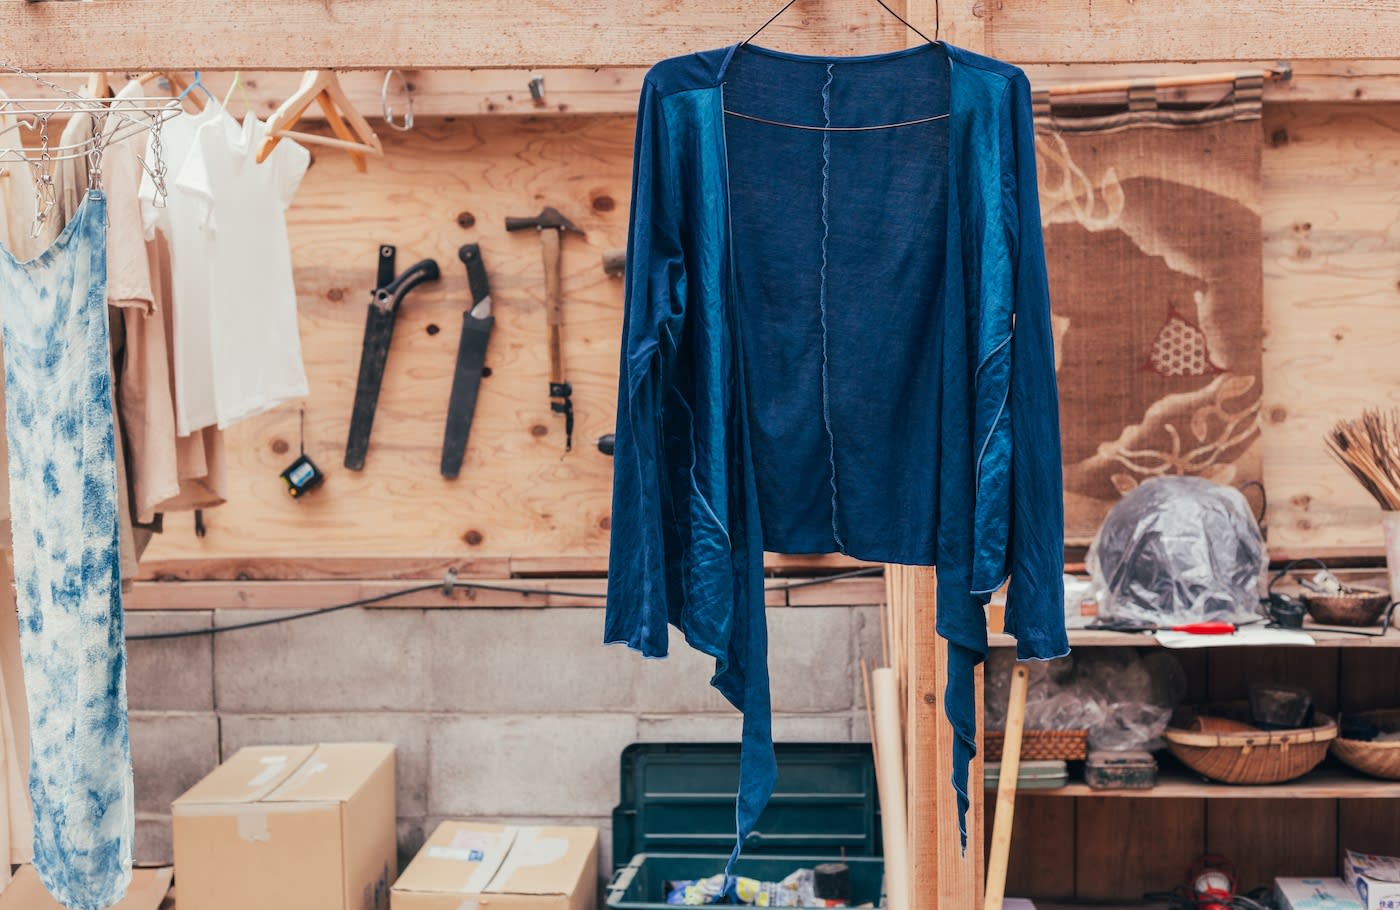 Dyeing your own clothes is the ultimate way to upcycle your old stuff